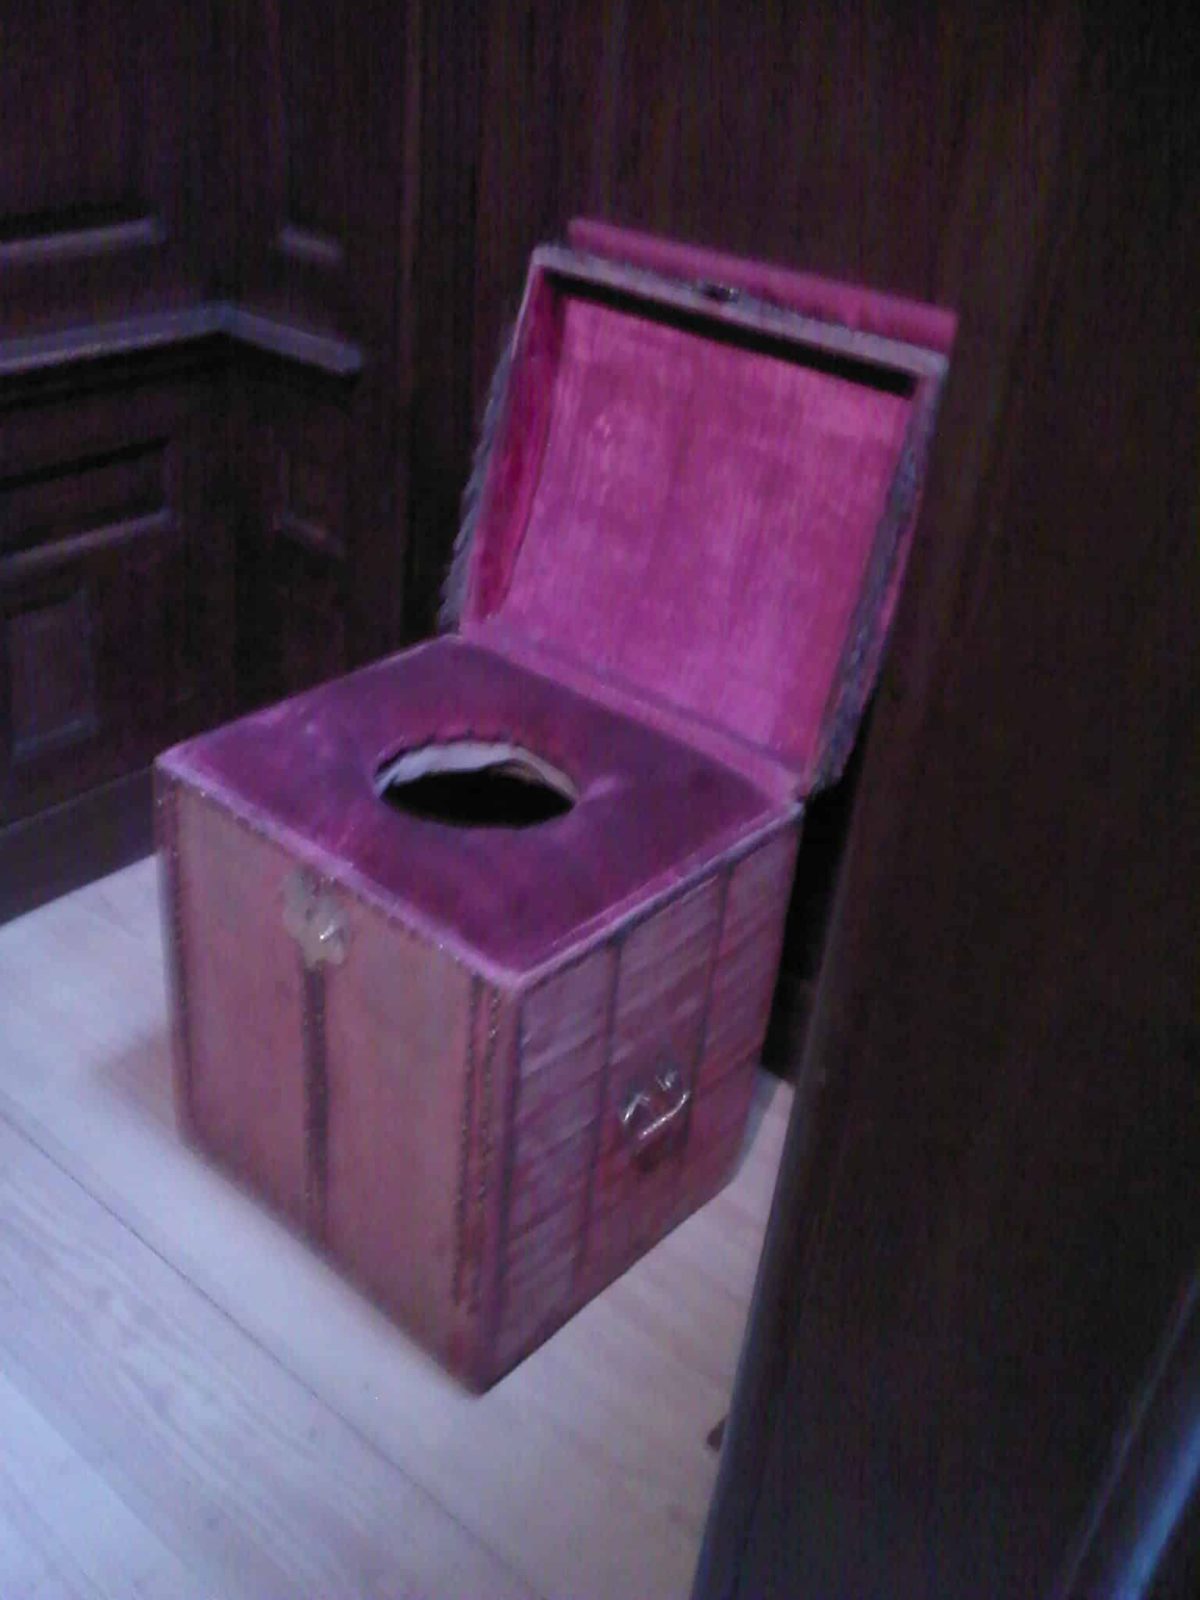 Royal Toilet Costs $40,000